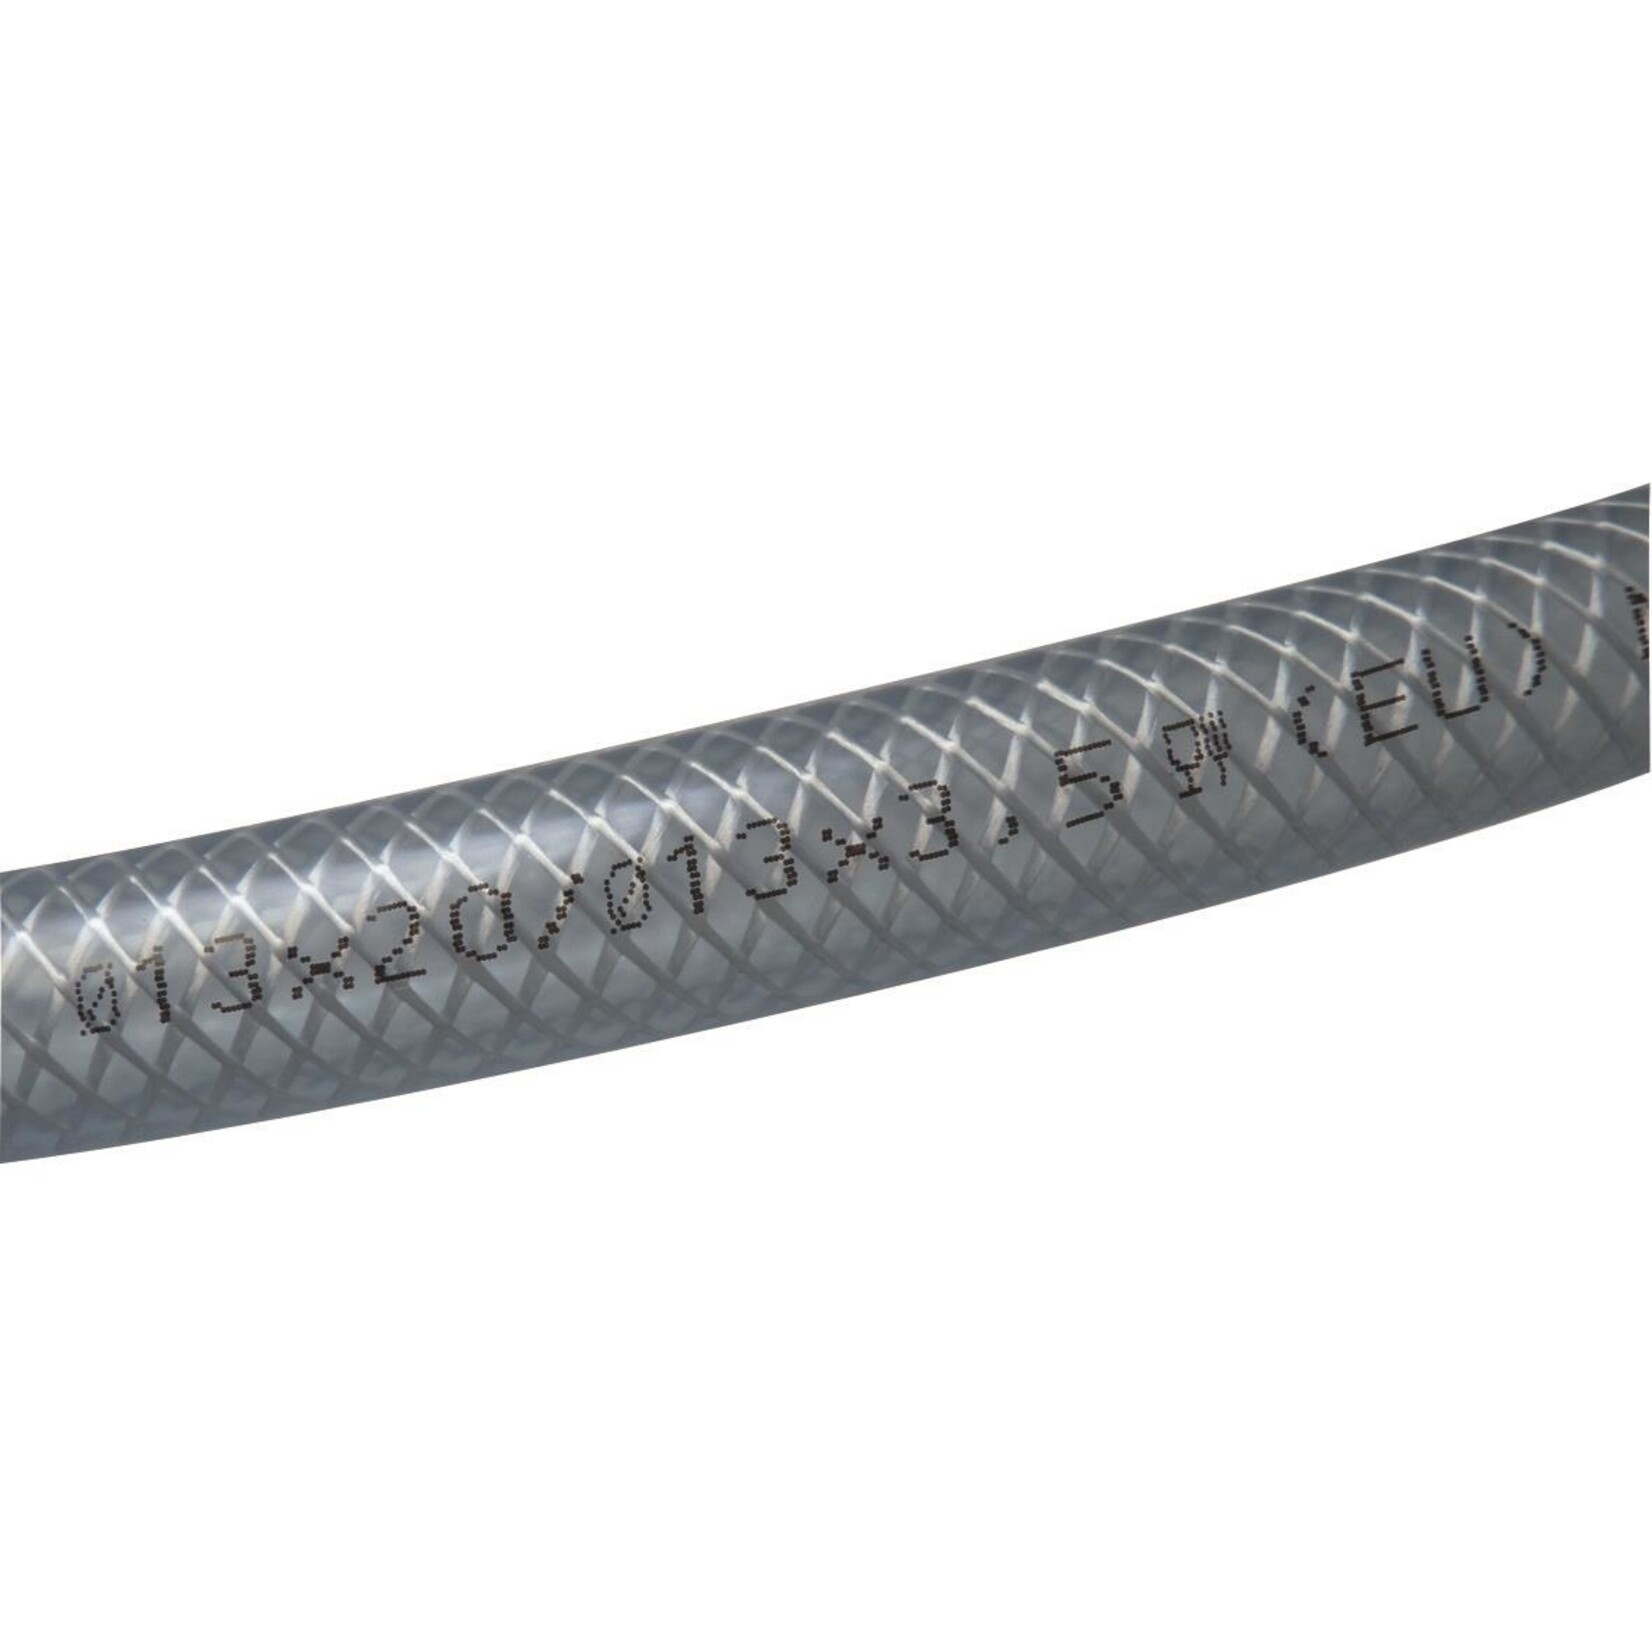 Plastimo D.16x22 fitted crystal hose